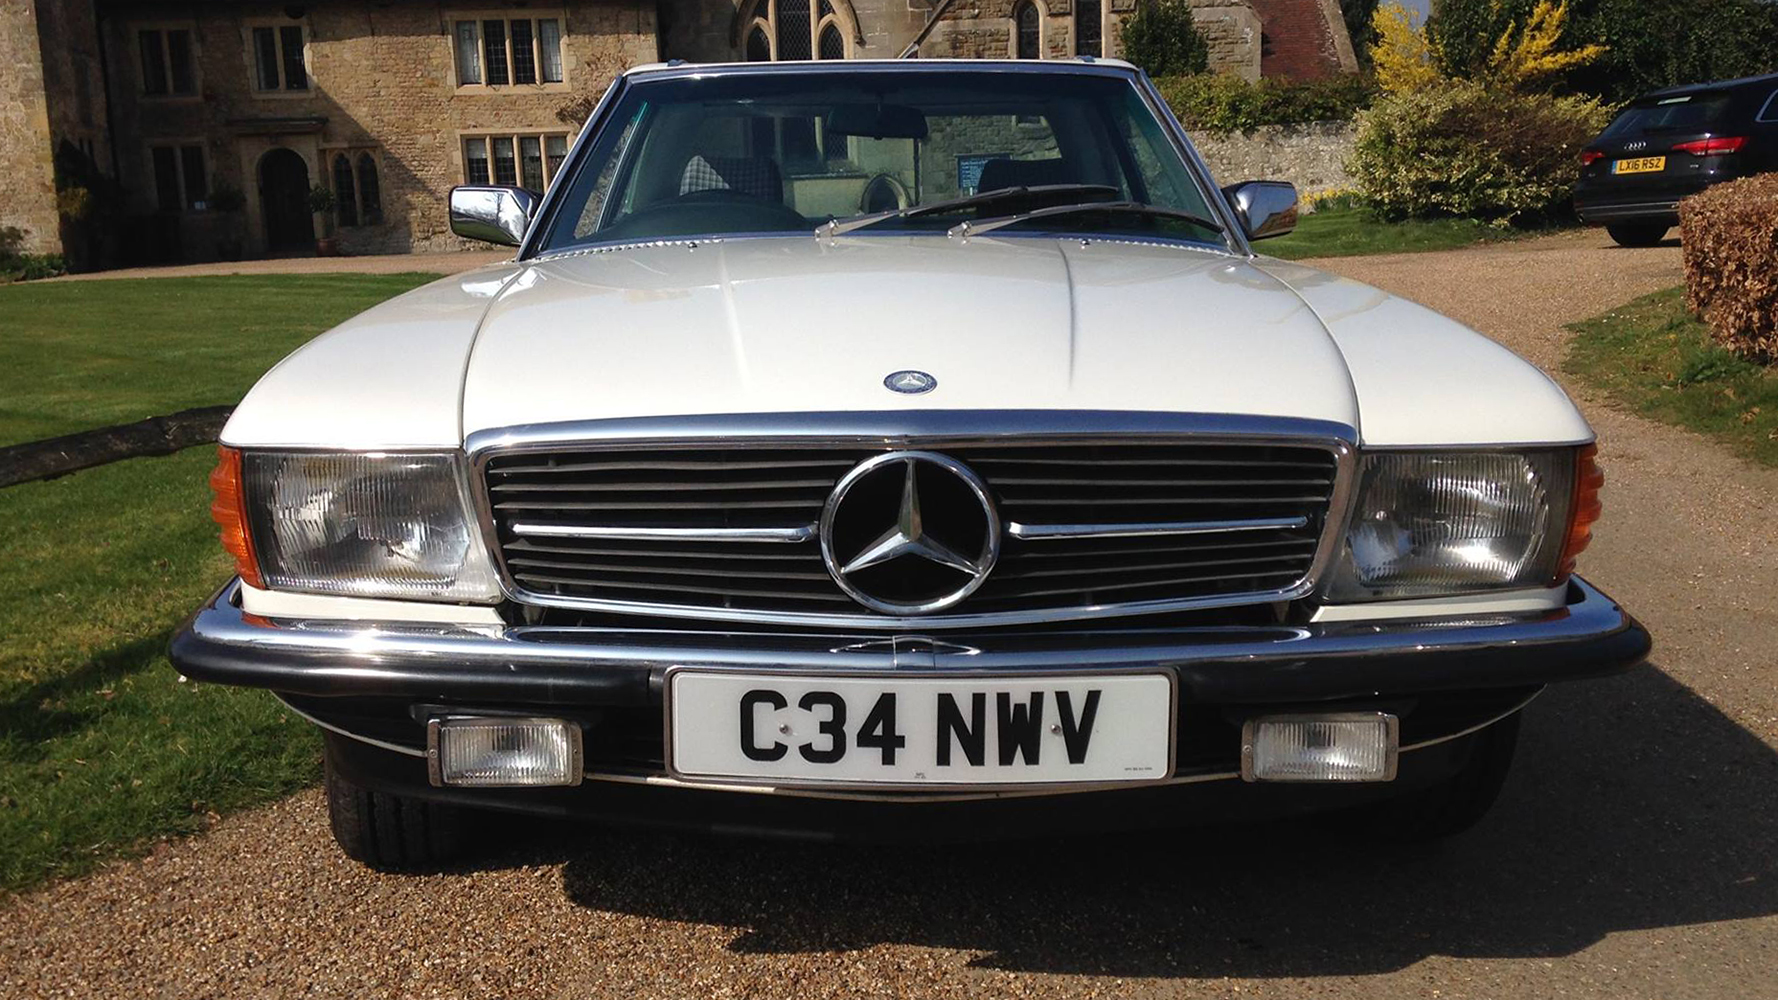 Country Classic Cars - Classic Car Servicing, Restoration & Sales in Surrey &West Sussex